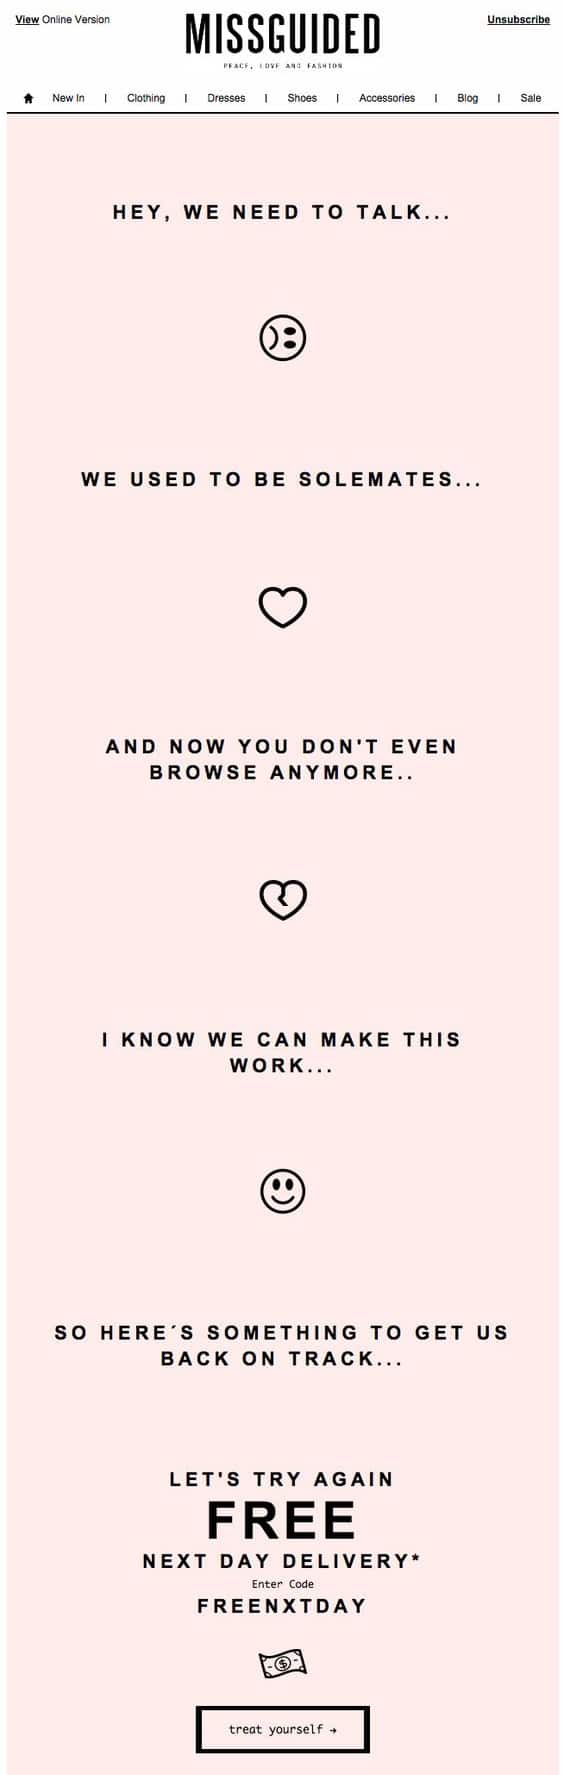 missguided-email-campaign